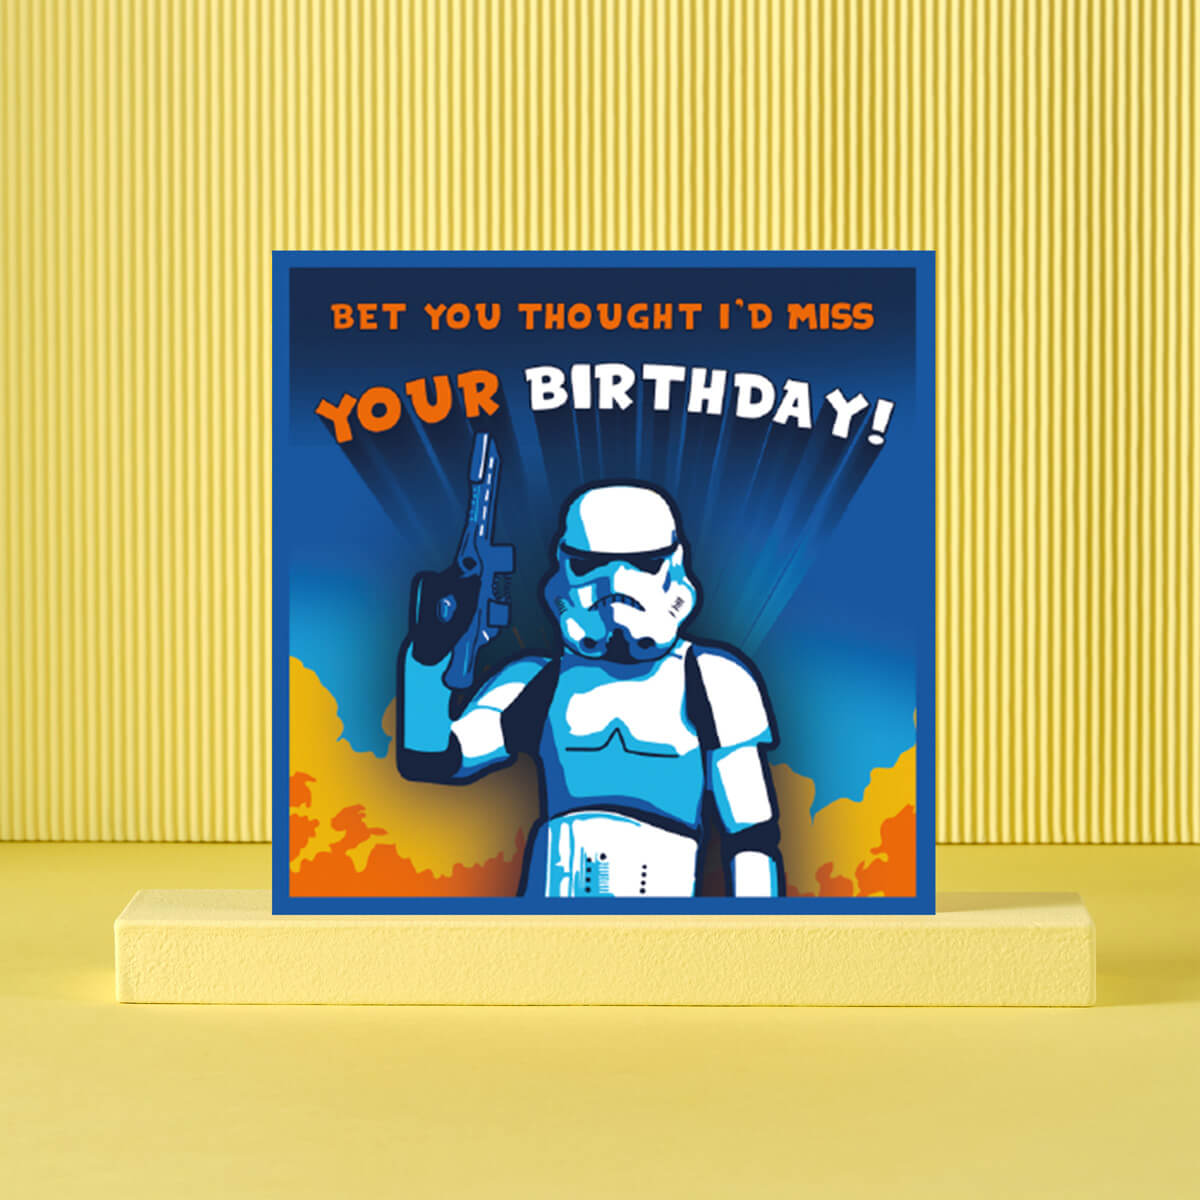 Original Stormtrooper Birthday Card - Card reads 'Bet you thought i'd miss your birthday'